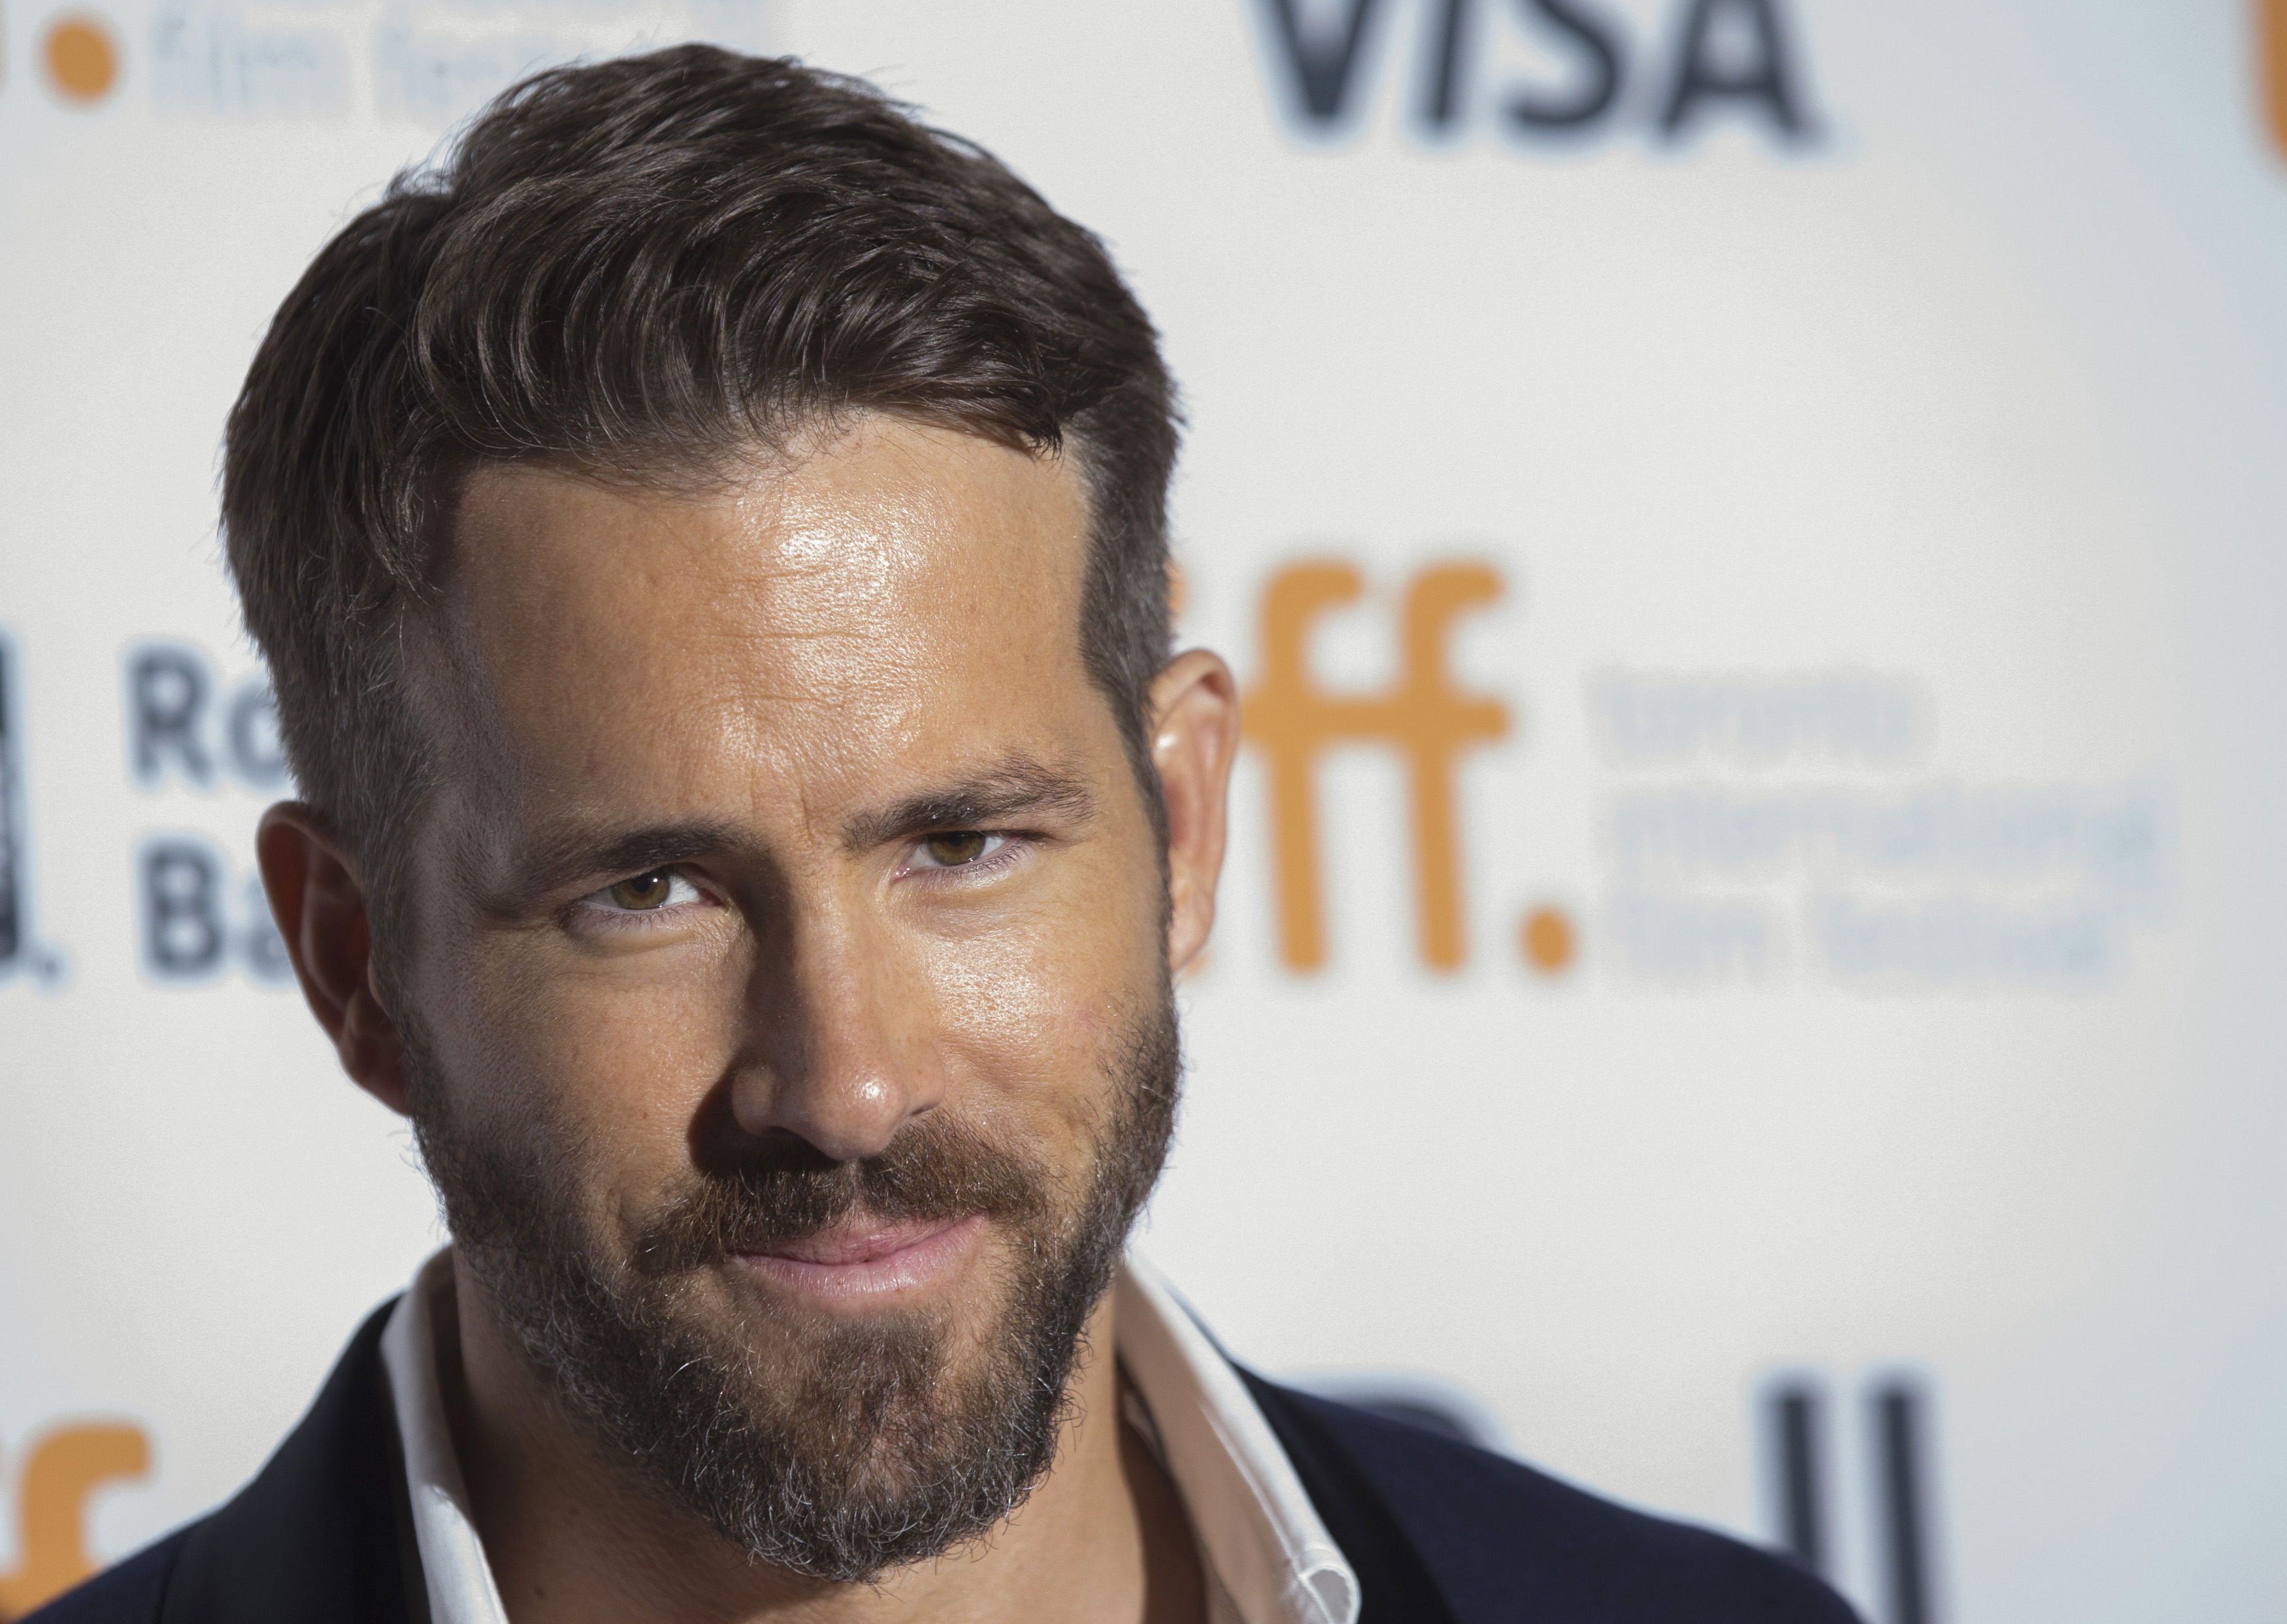 Cast member Ryan Reynolds arrives for the "The Voices" gala during the Toronto International Film Festival in Toronto on Sept. 11, 2014. (Mark Blinch—Reuters)